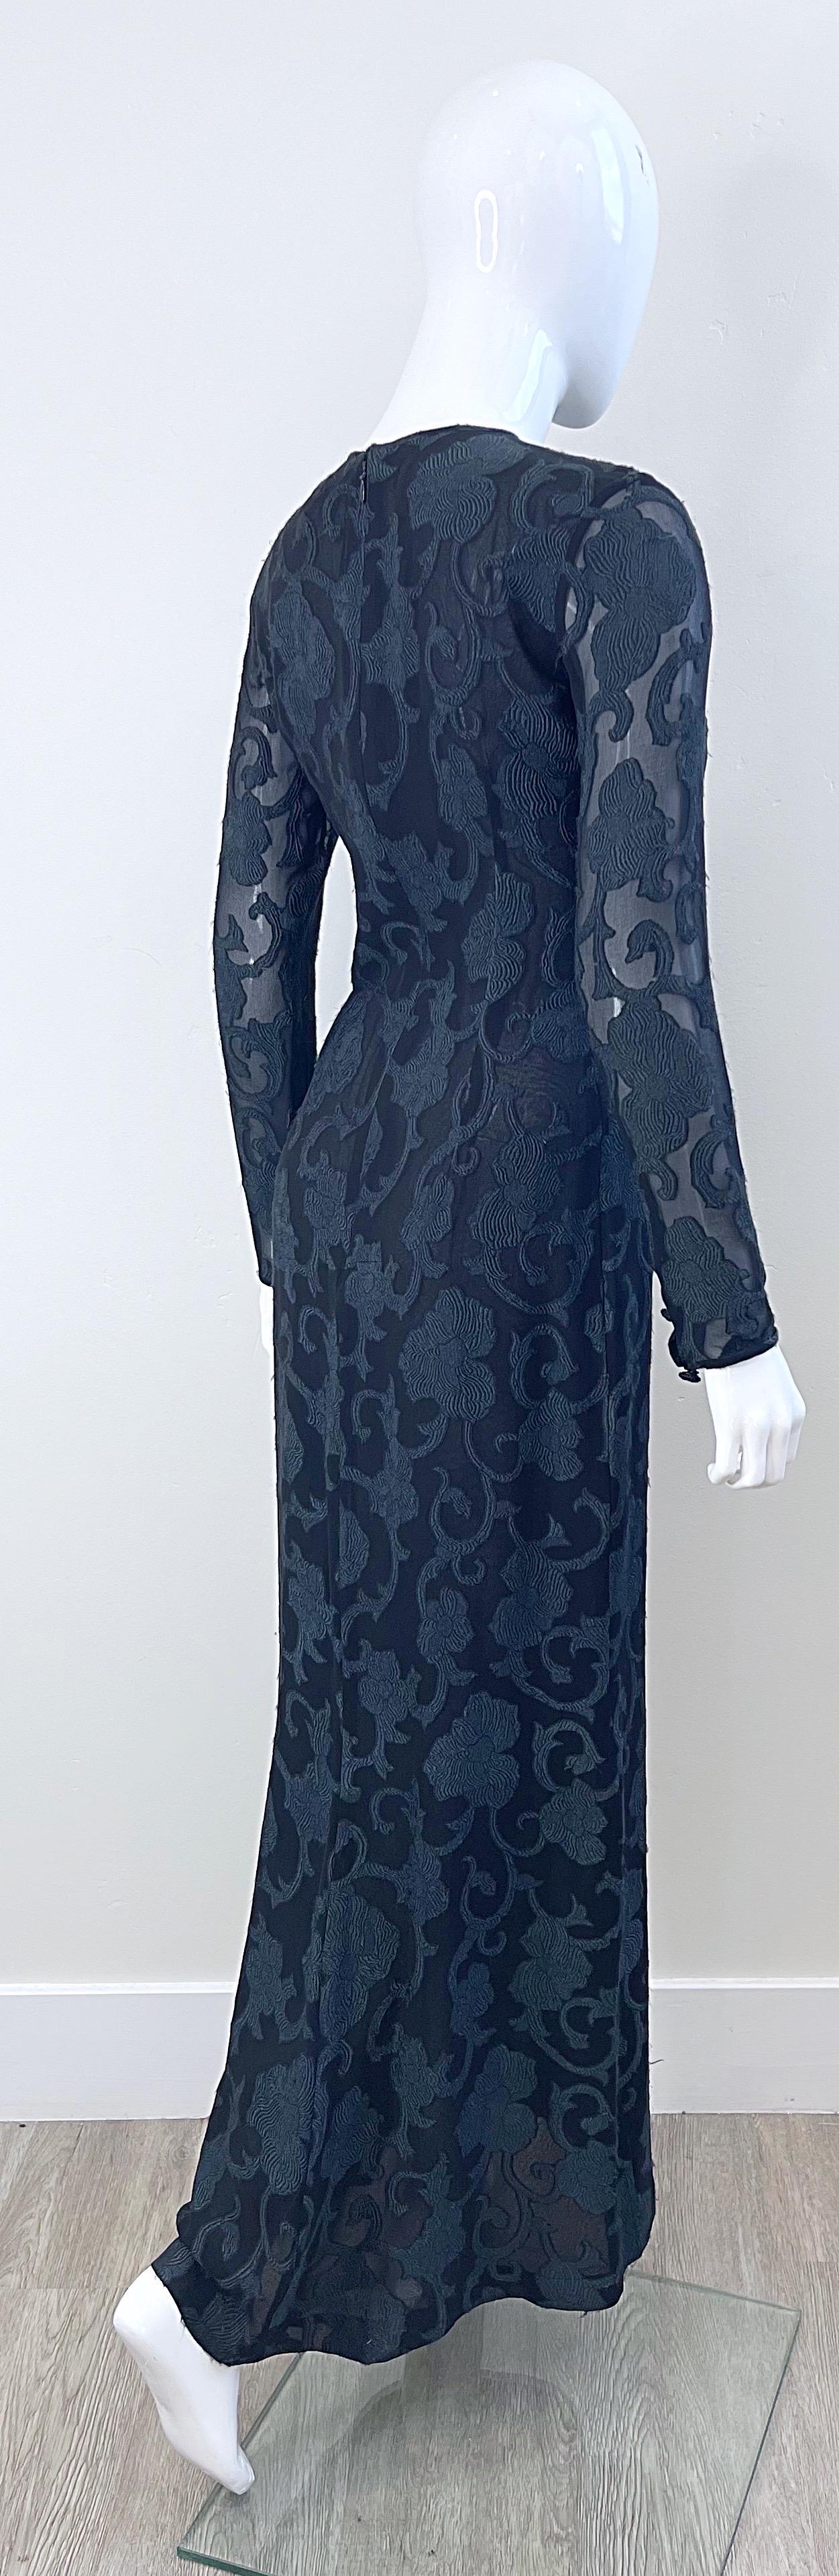 1990s James Purcell Couture Black Silk Chiffon Semi Sheer Filigree Print Gown  For Sale 3